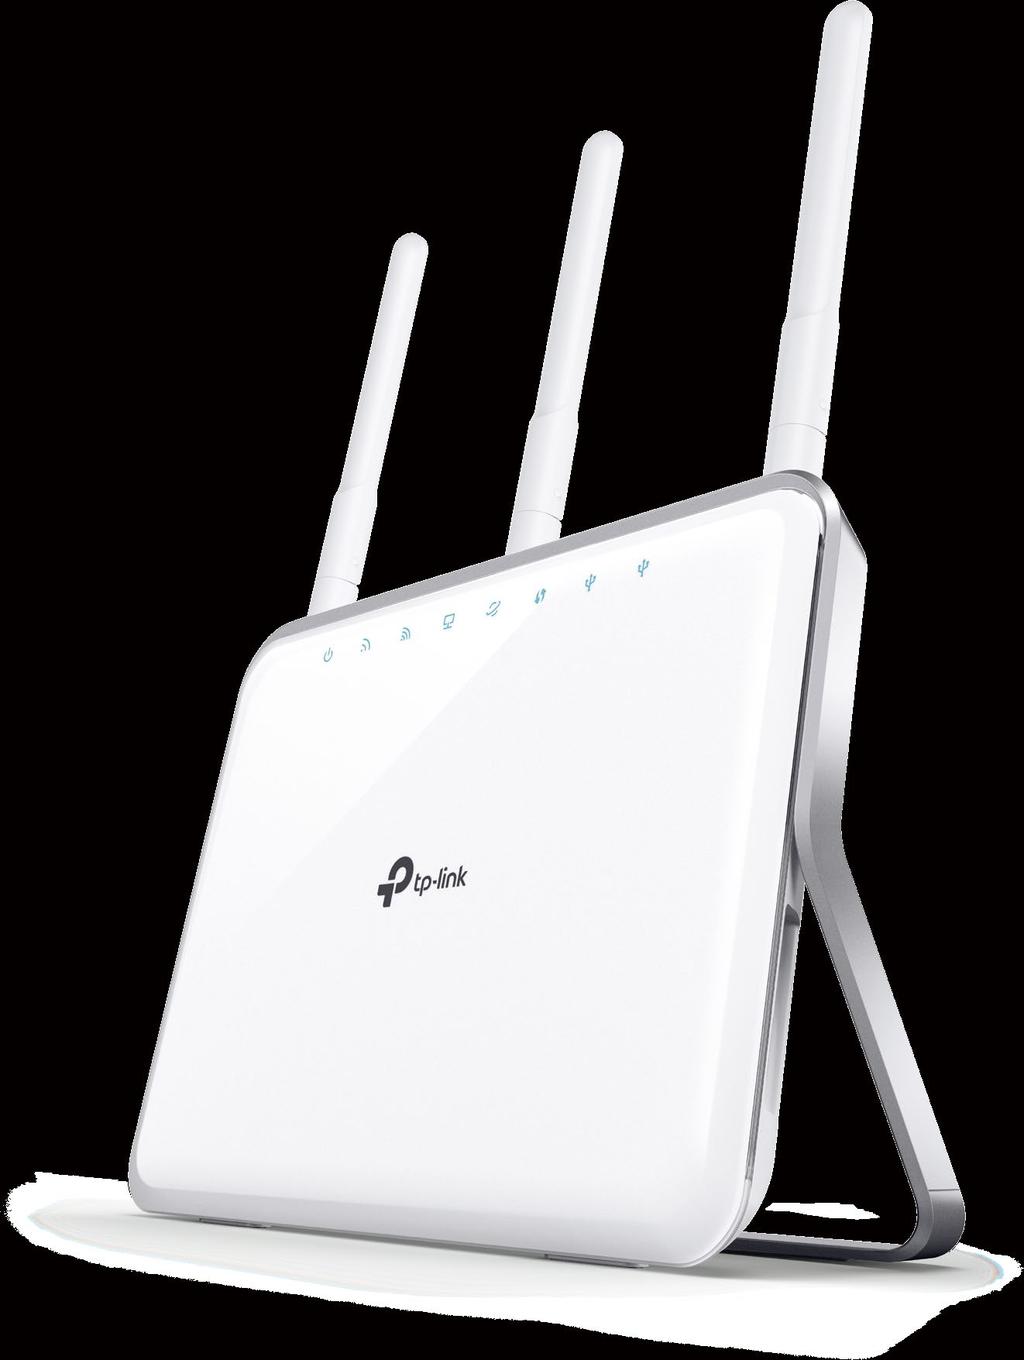 AC1900 Wireless Dual Band Gigabit Router Raise the Bar for Wi-Fi Speed and Coverage